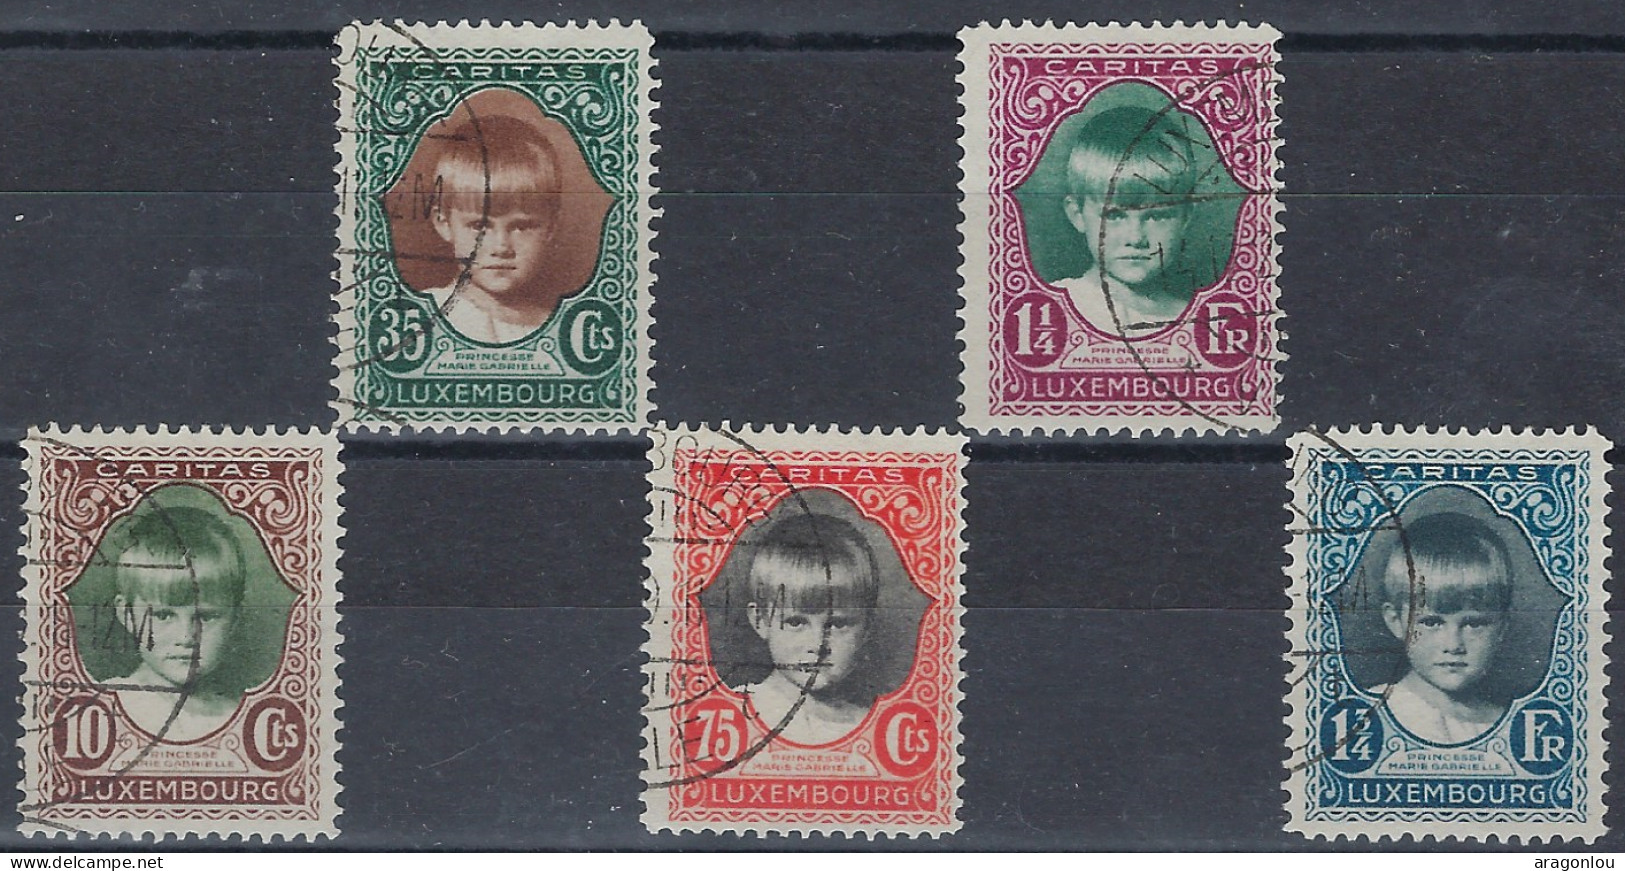 Luxembourg - Luxemburg - Timbre Série 1929   Princesse Marie-Gabrielle   ° - Usados